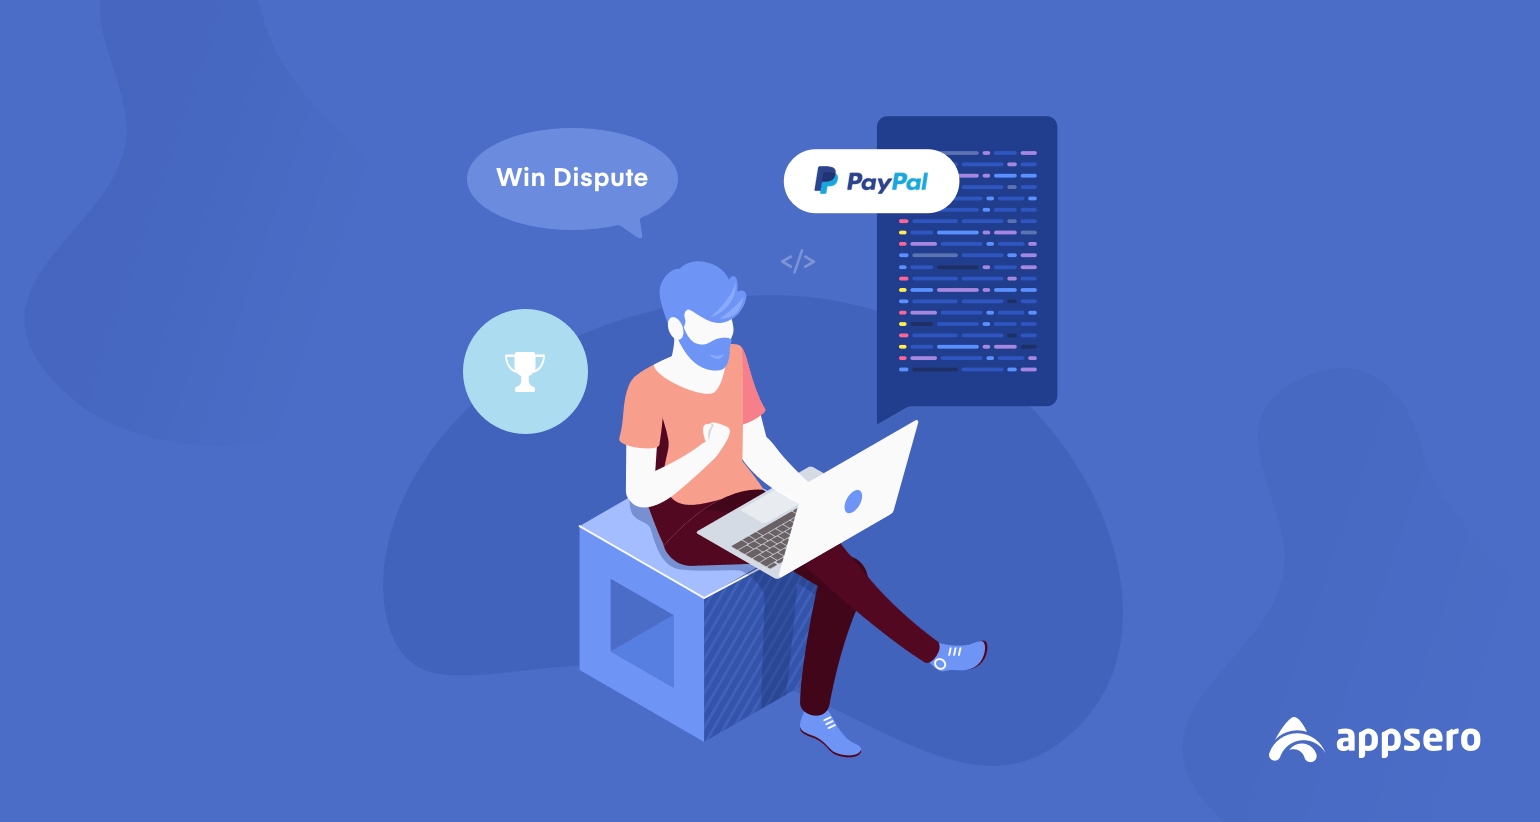 How to win a paypal dispute